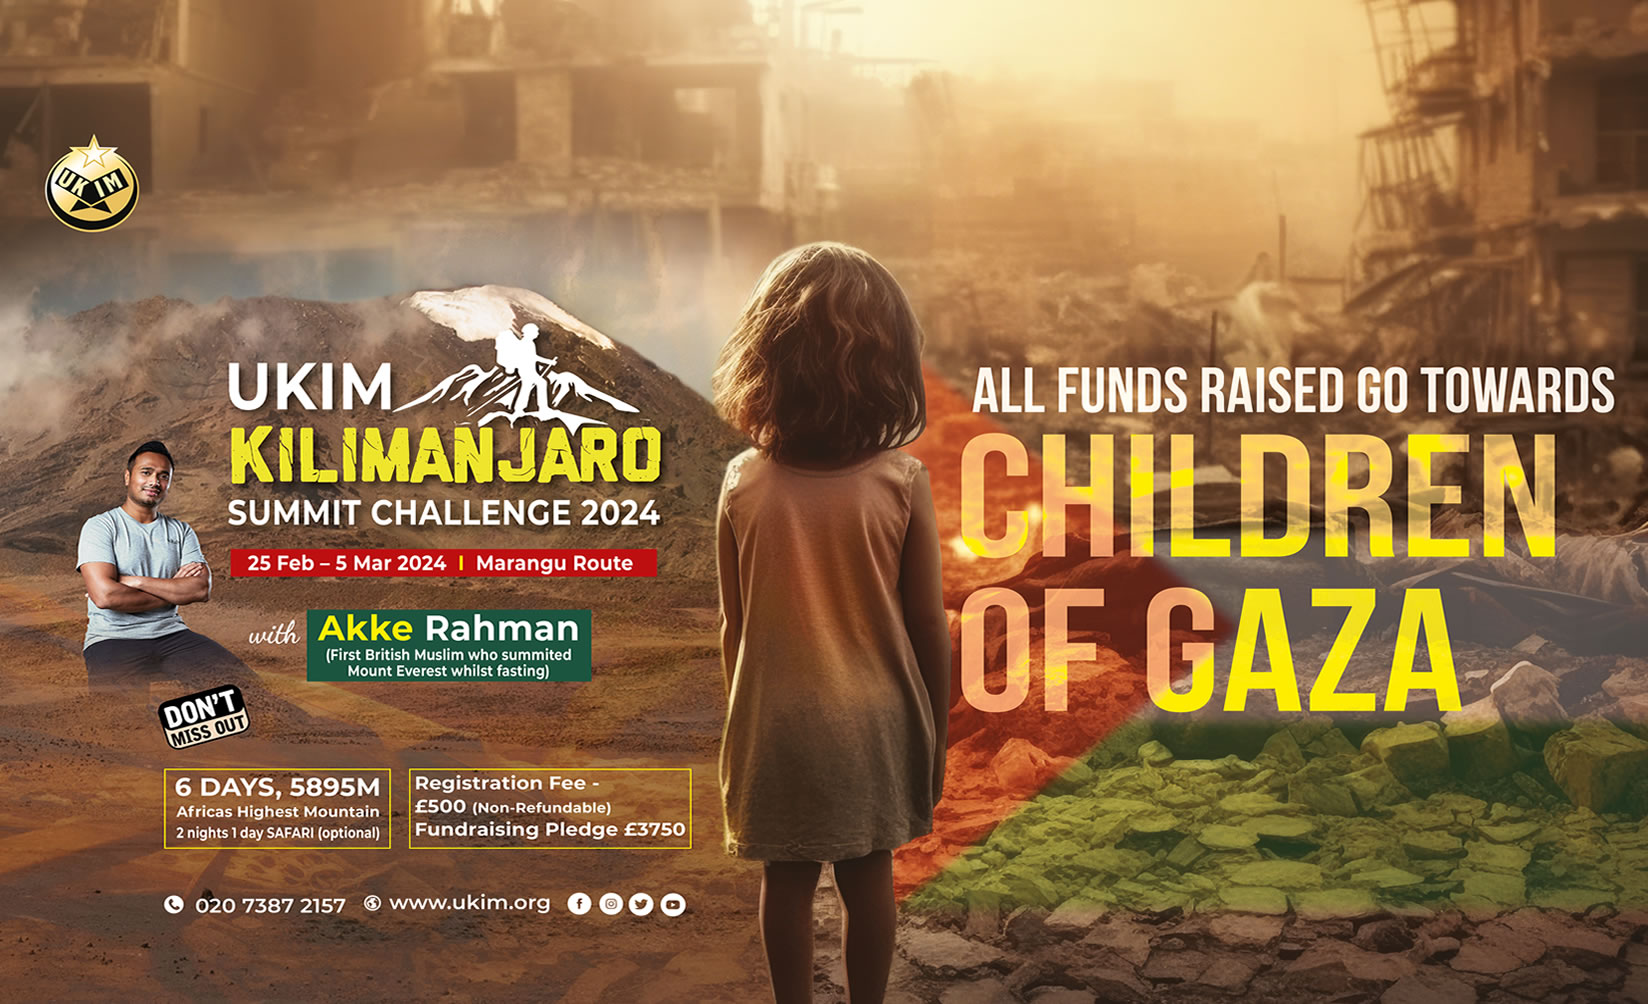 CLIMB MOUNT KILIMANJARO, THE ROOF OF AFRICA-TEAM UKIM SUPPORTING CHILDREN OF GAZA